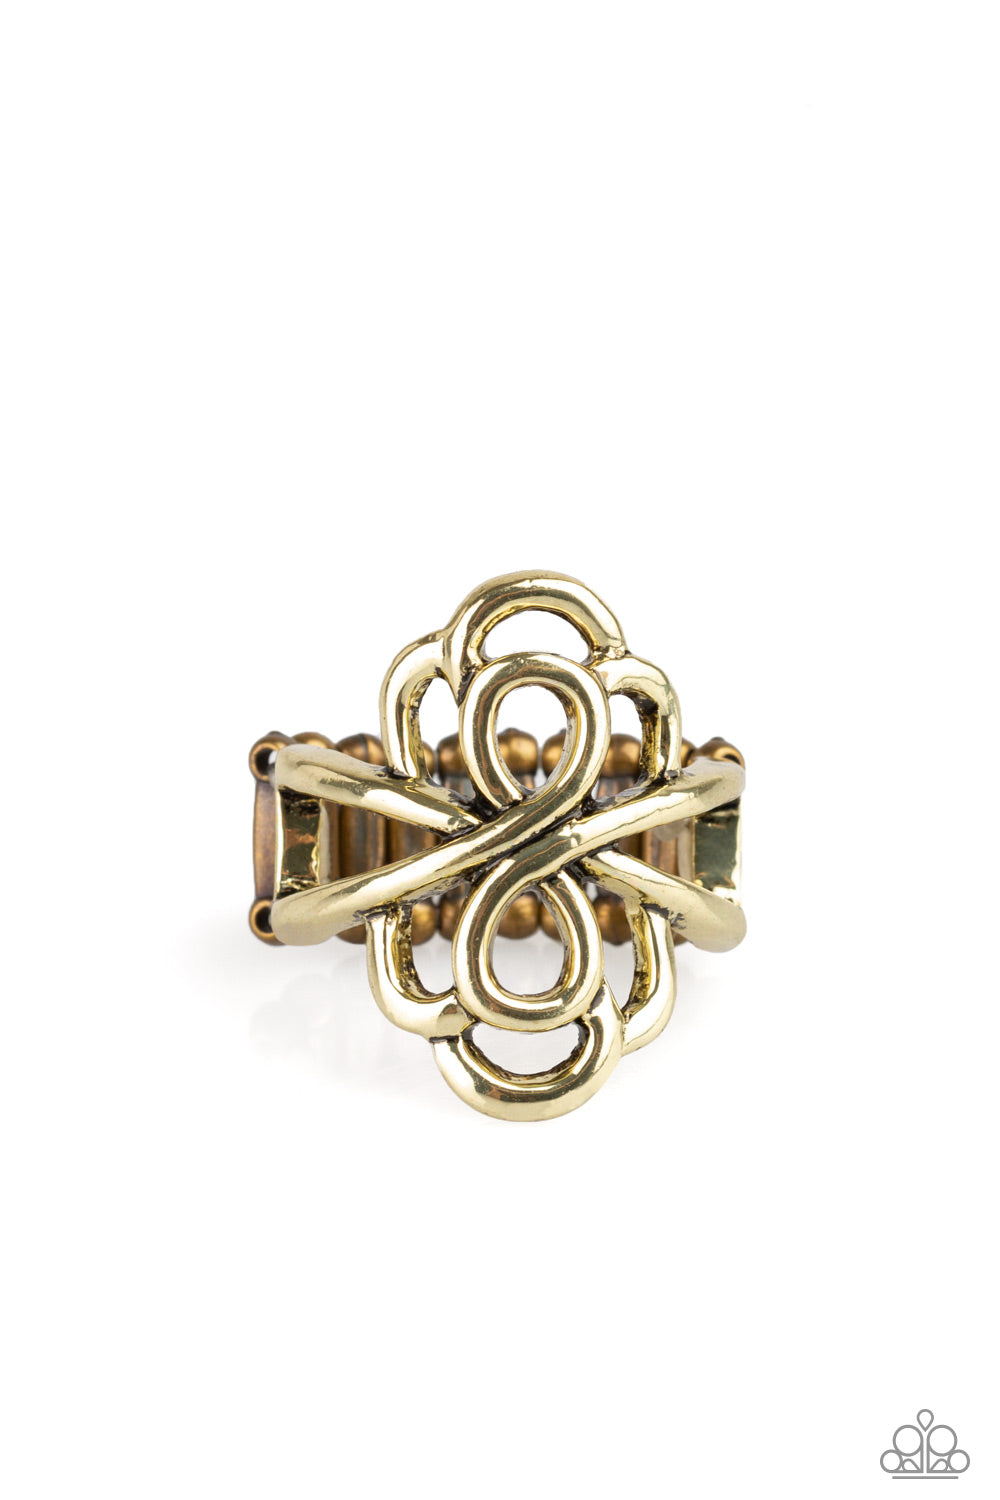 Ever Entwined - Brass - Bella Bling by Natalie